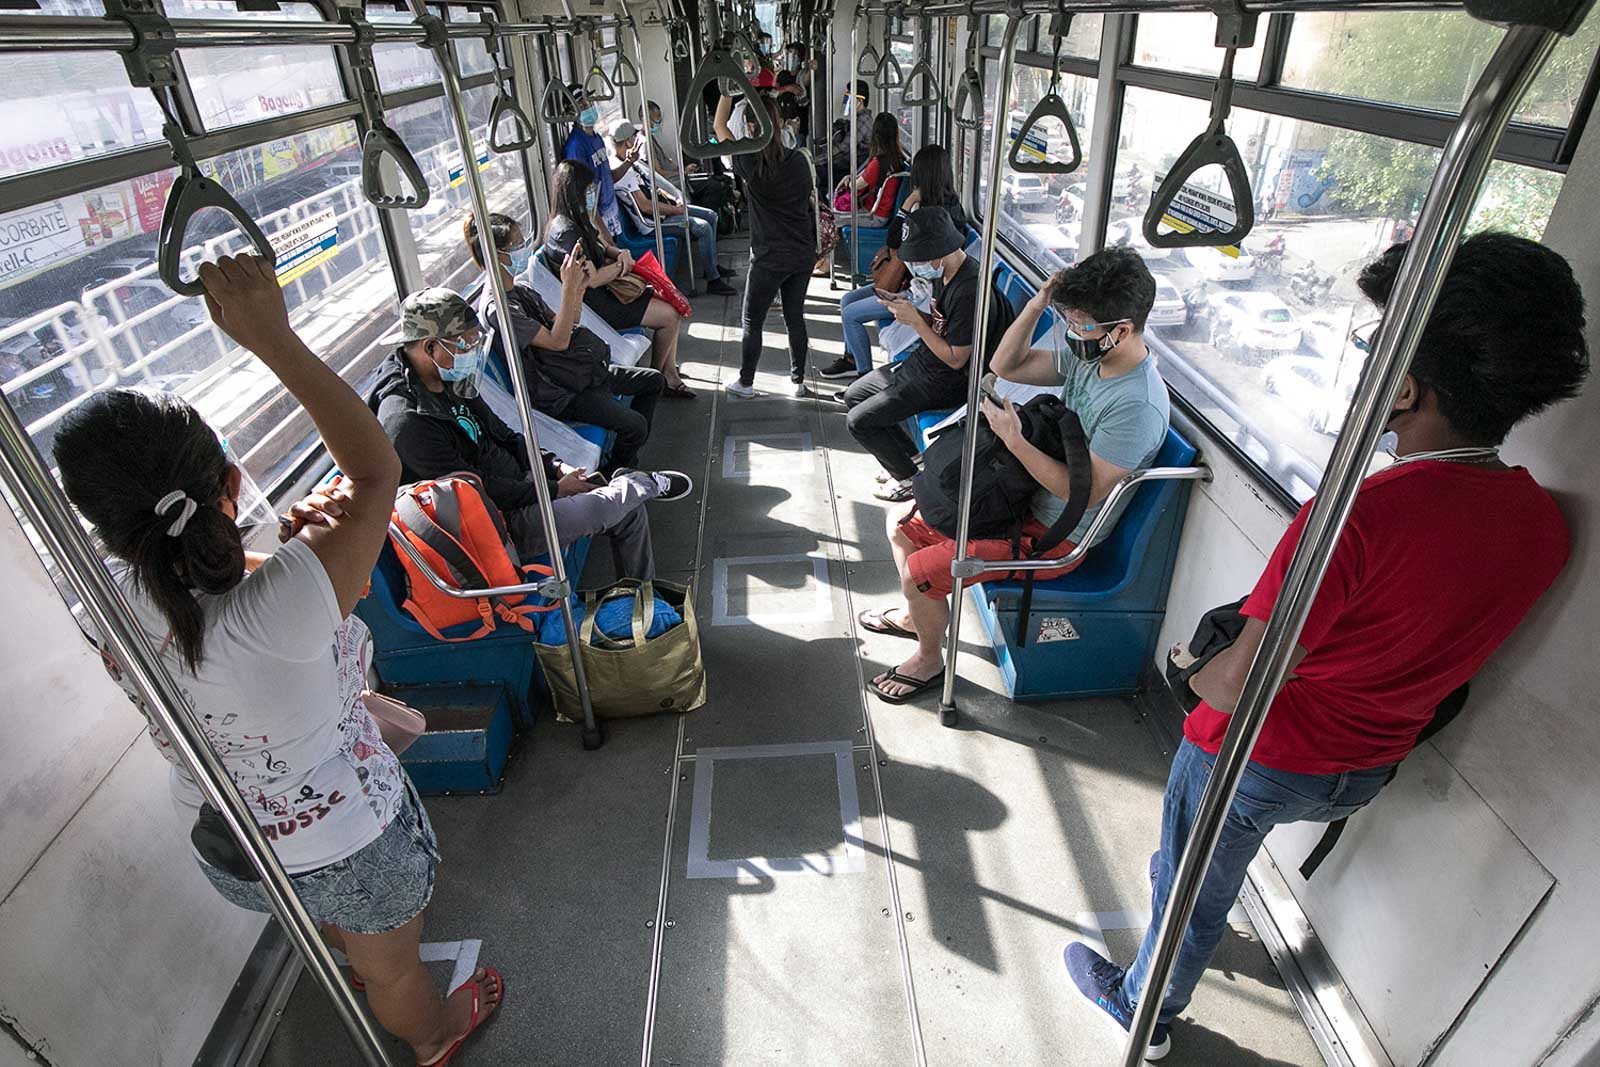 Gov’t reduces one-meter rule to ‘one seat apart’ in public transportation